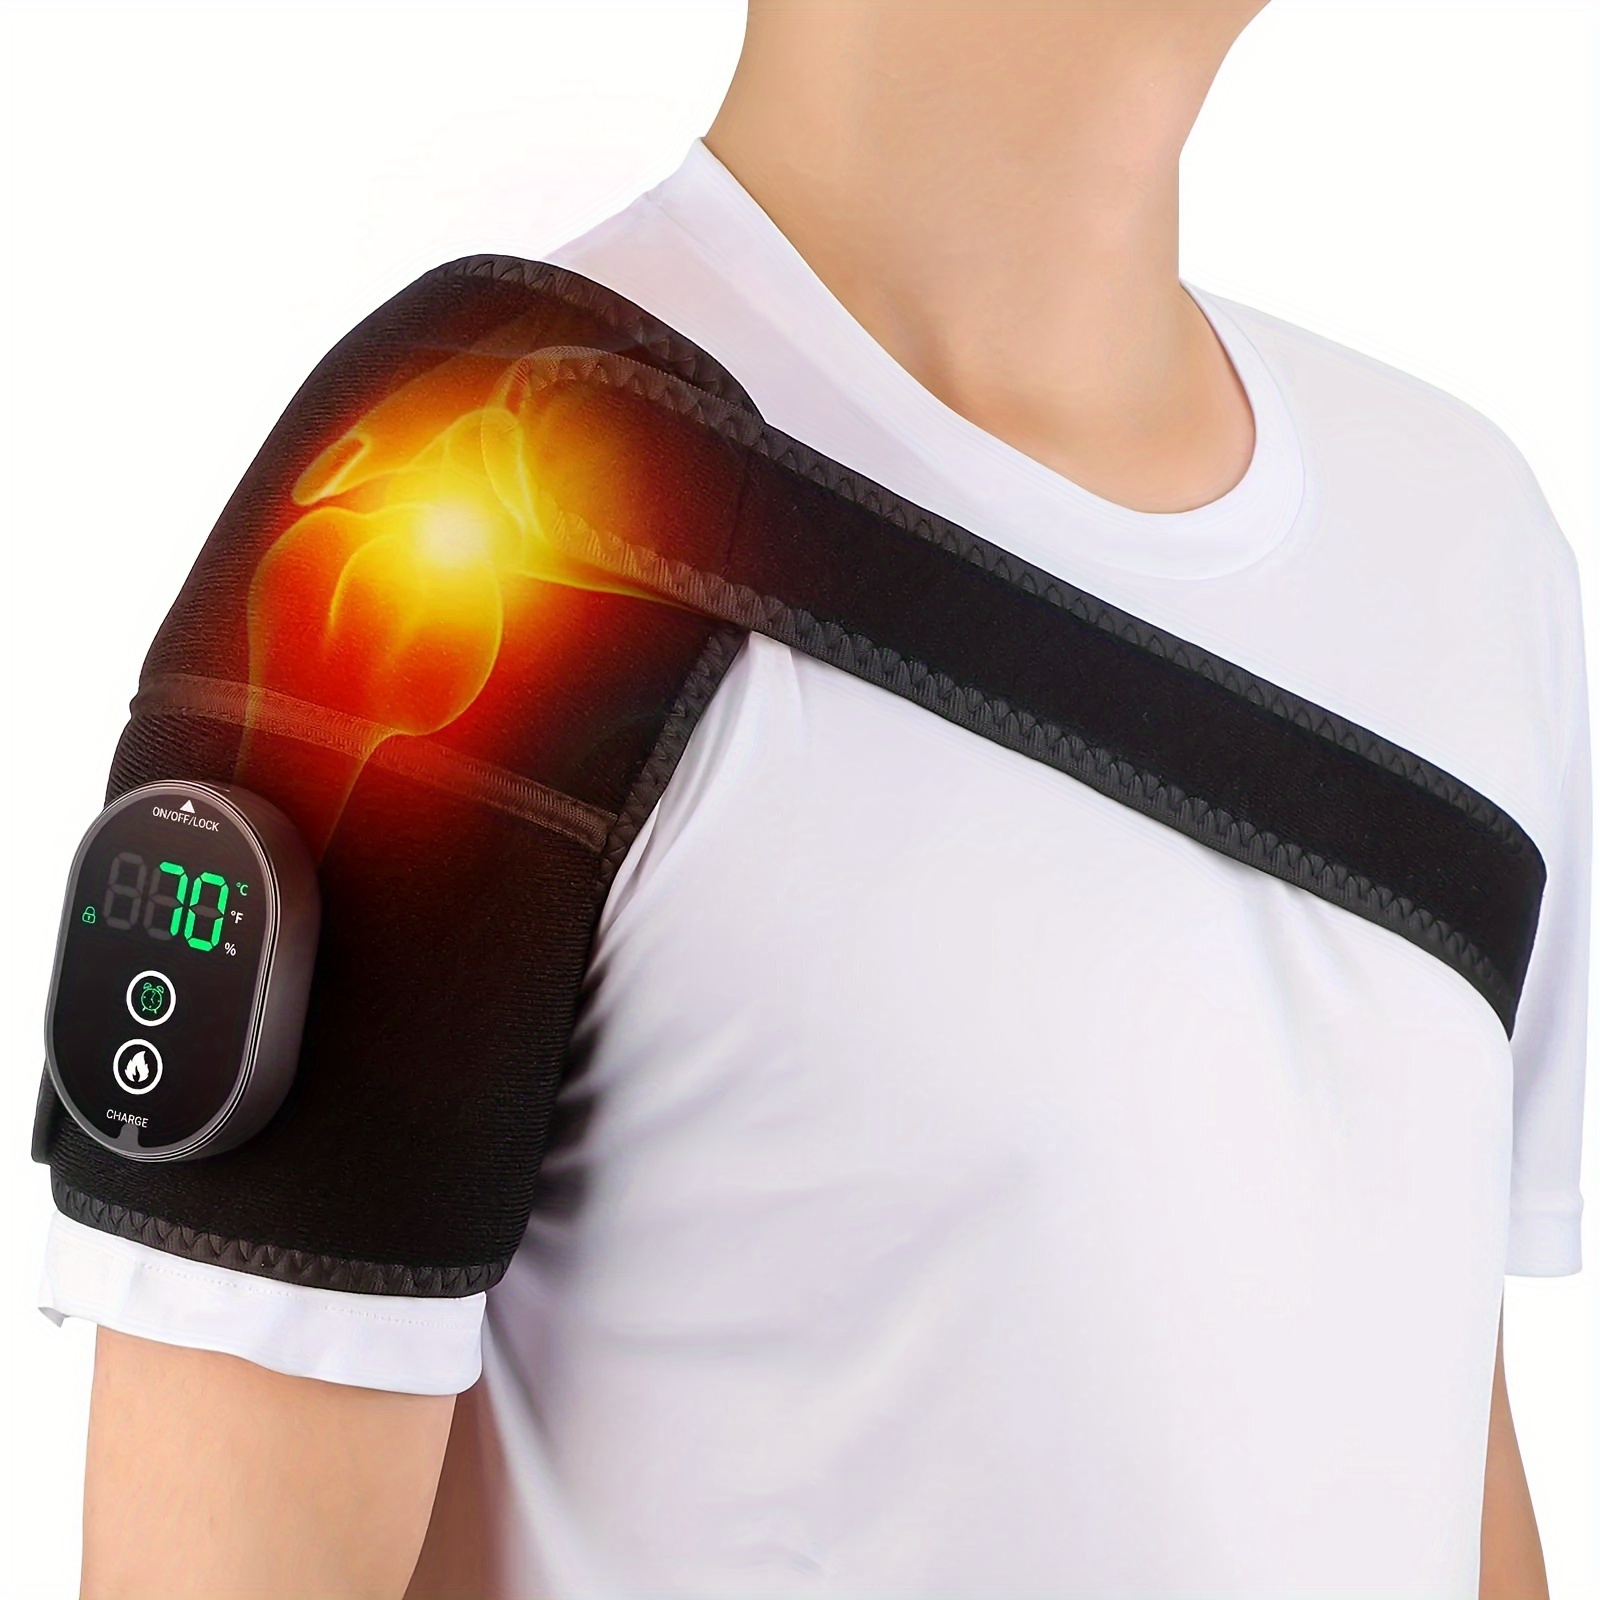 Leg Massagers Electric Heating Knee Massager Far Infrared Joint  Physiotherapy Elbow Knee Pad Vibration Massage Knee Pain Relief Health Care  230923 From Zhong06, $34.15